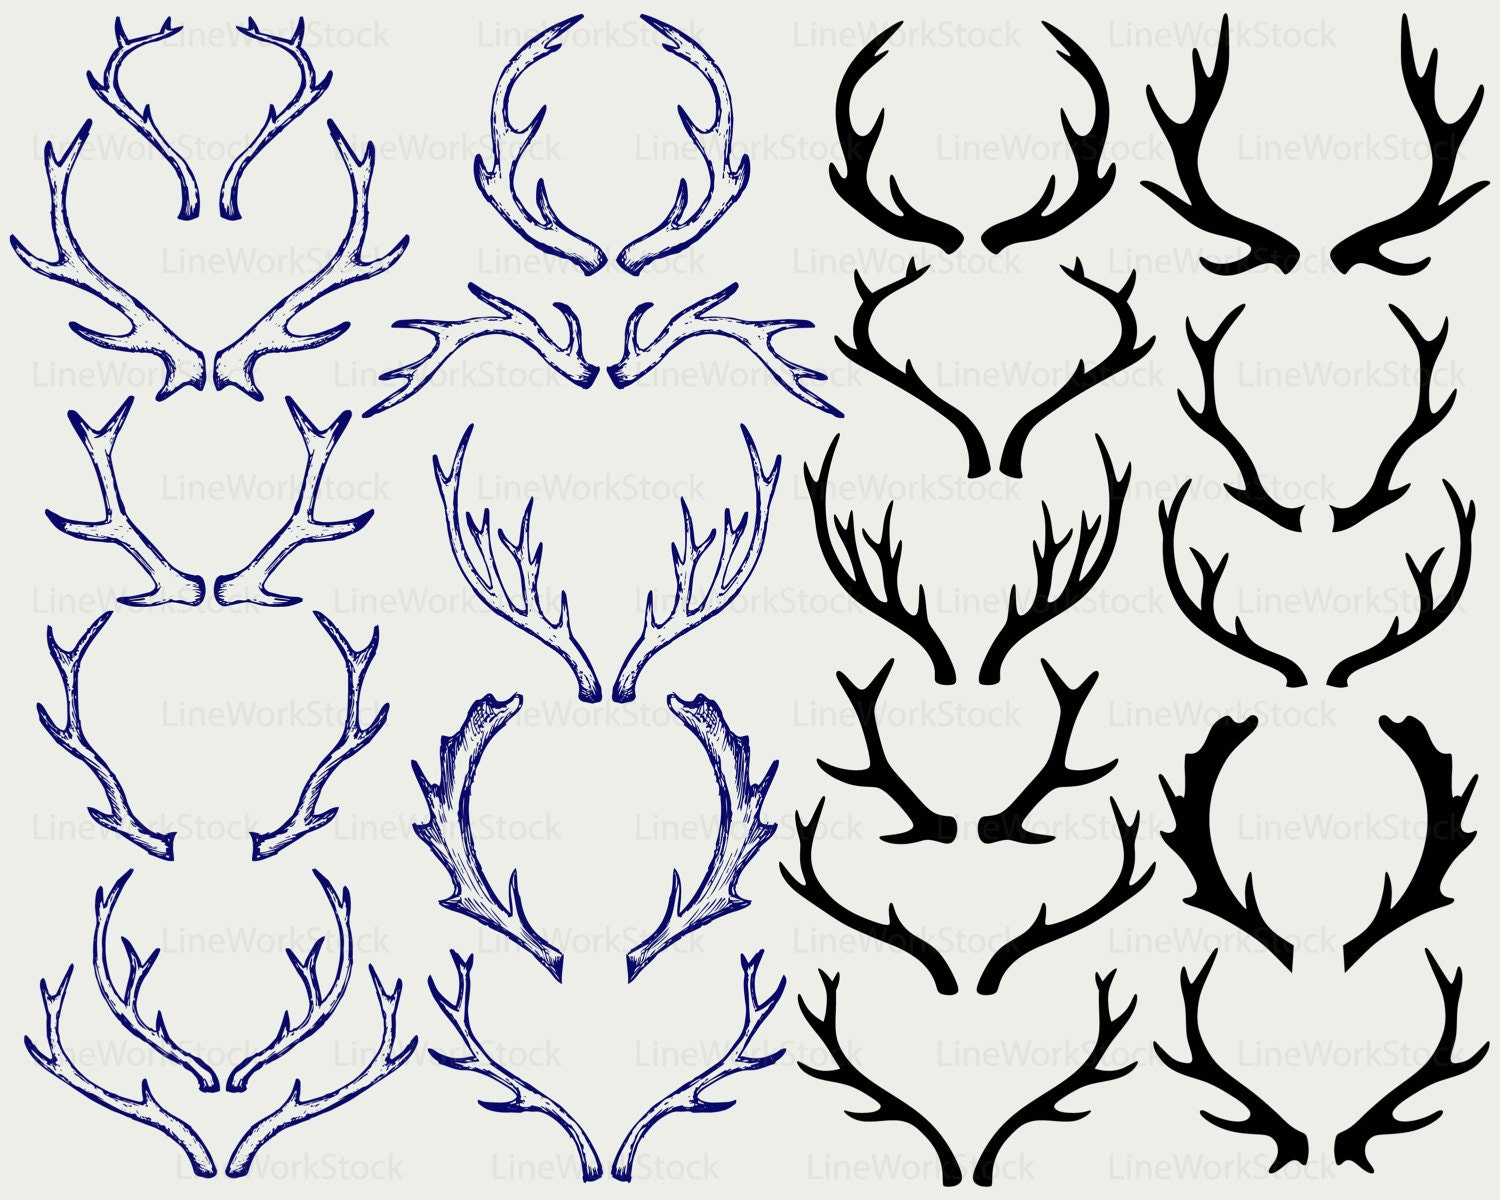 195 icons in this antler clip arts collection free antler mobile app interf...